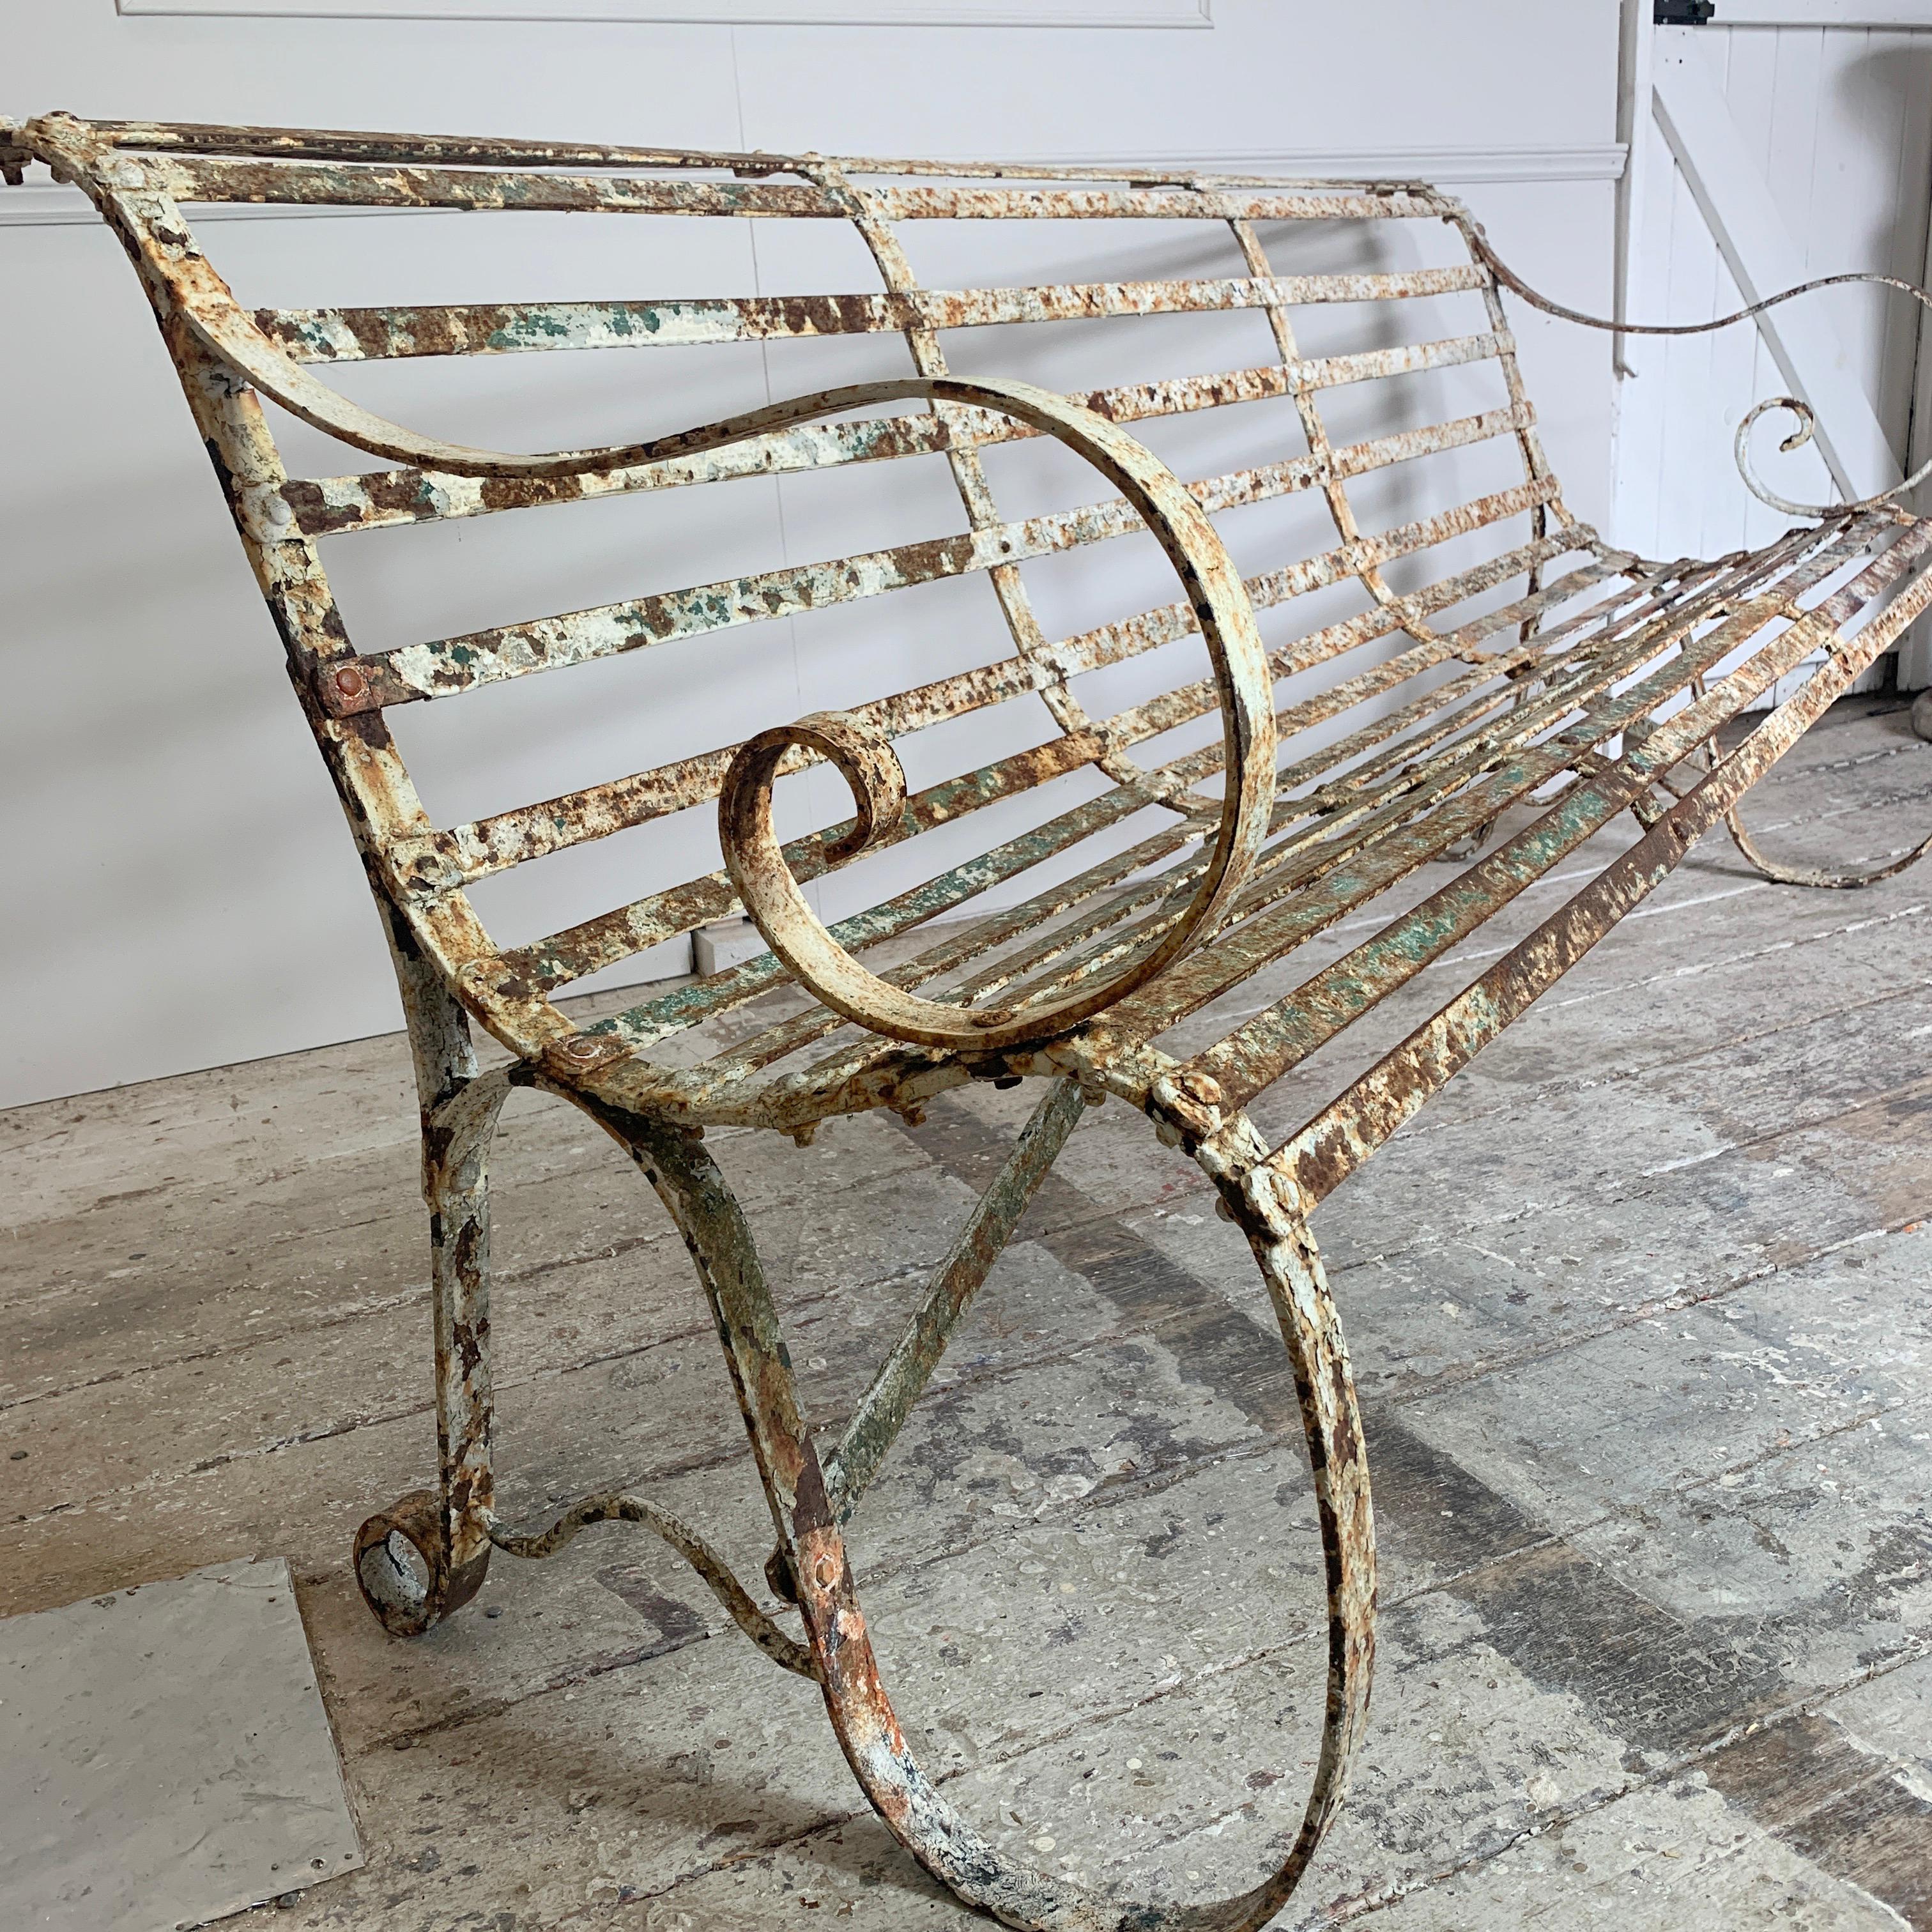 19th century English garden bench, originally from a cricket club
Beautiful Edwardian wrought iron strap work
The iron strapwork is used to give a really comfortable seat
This elegant shape has a curved seat and back, and scrolled arms
This is a